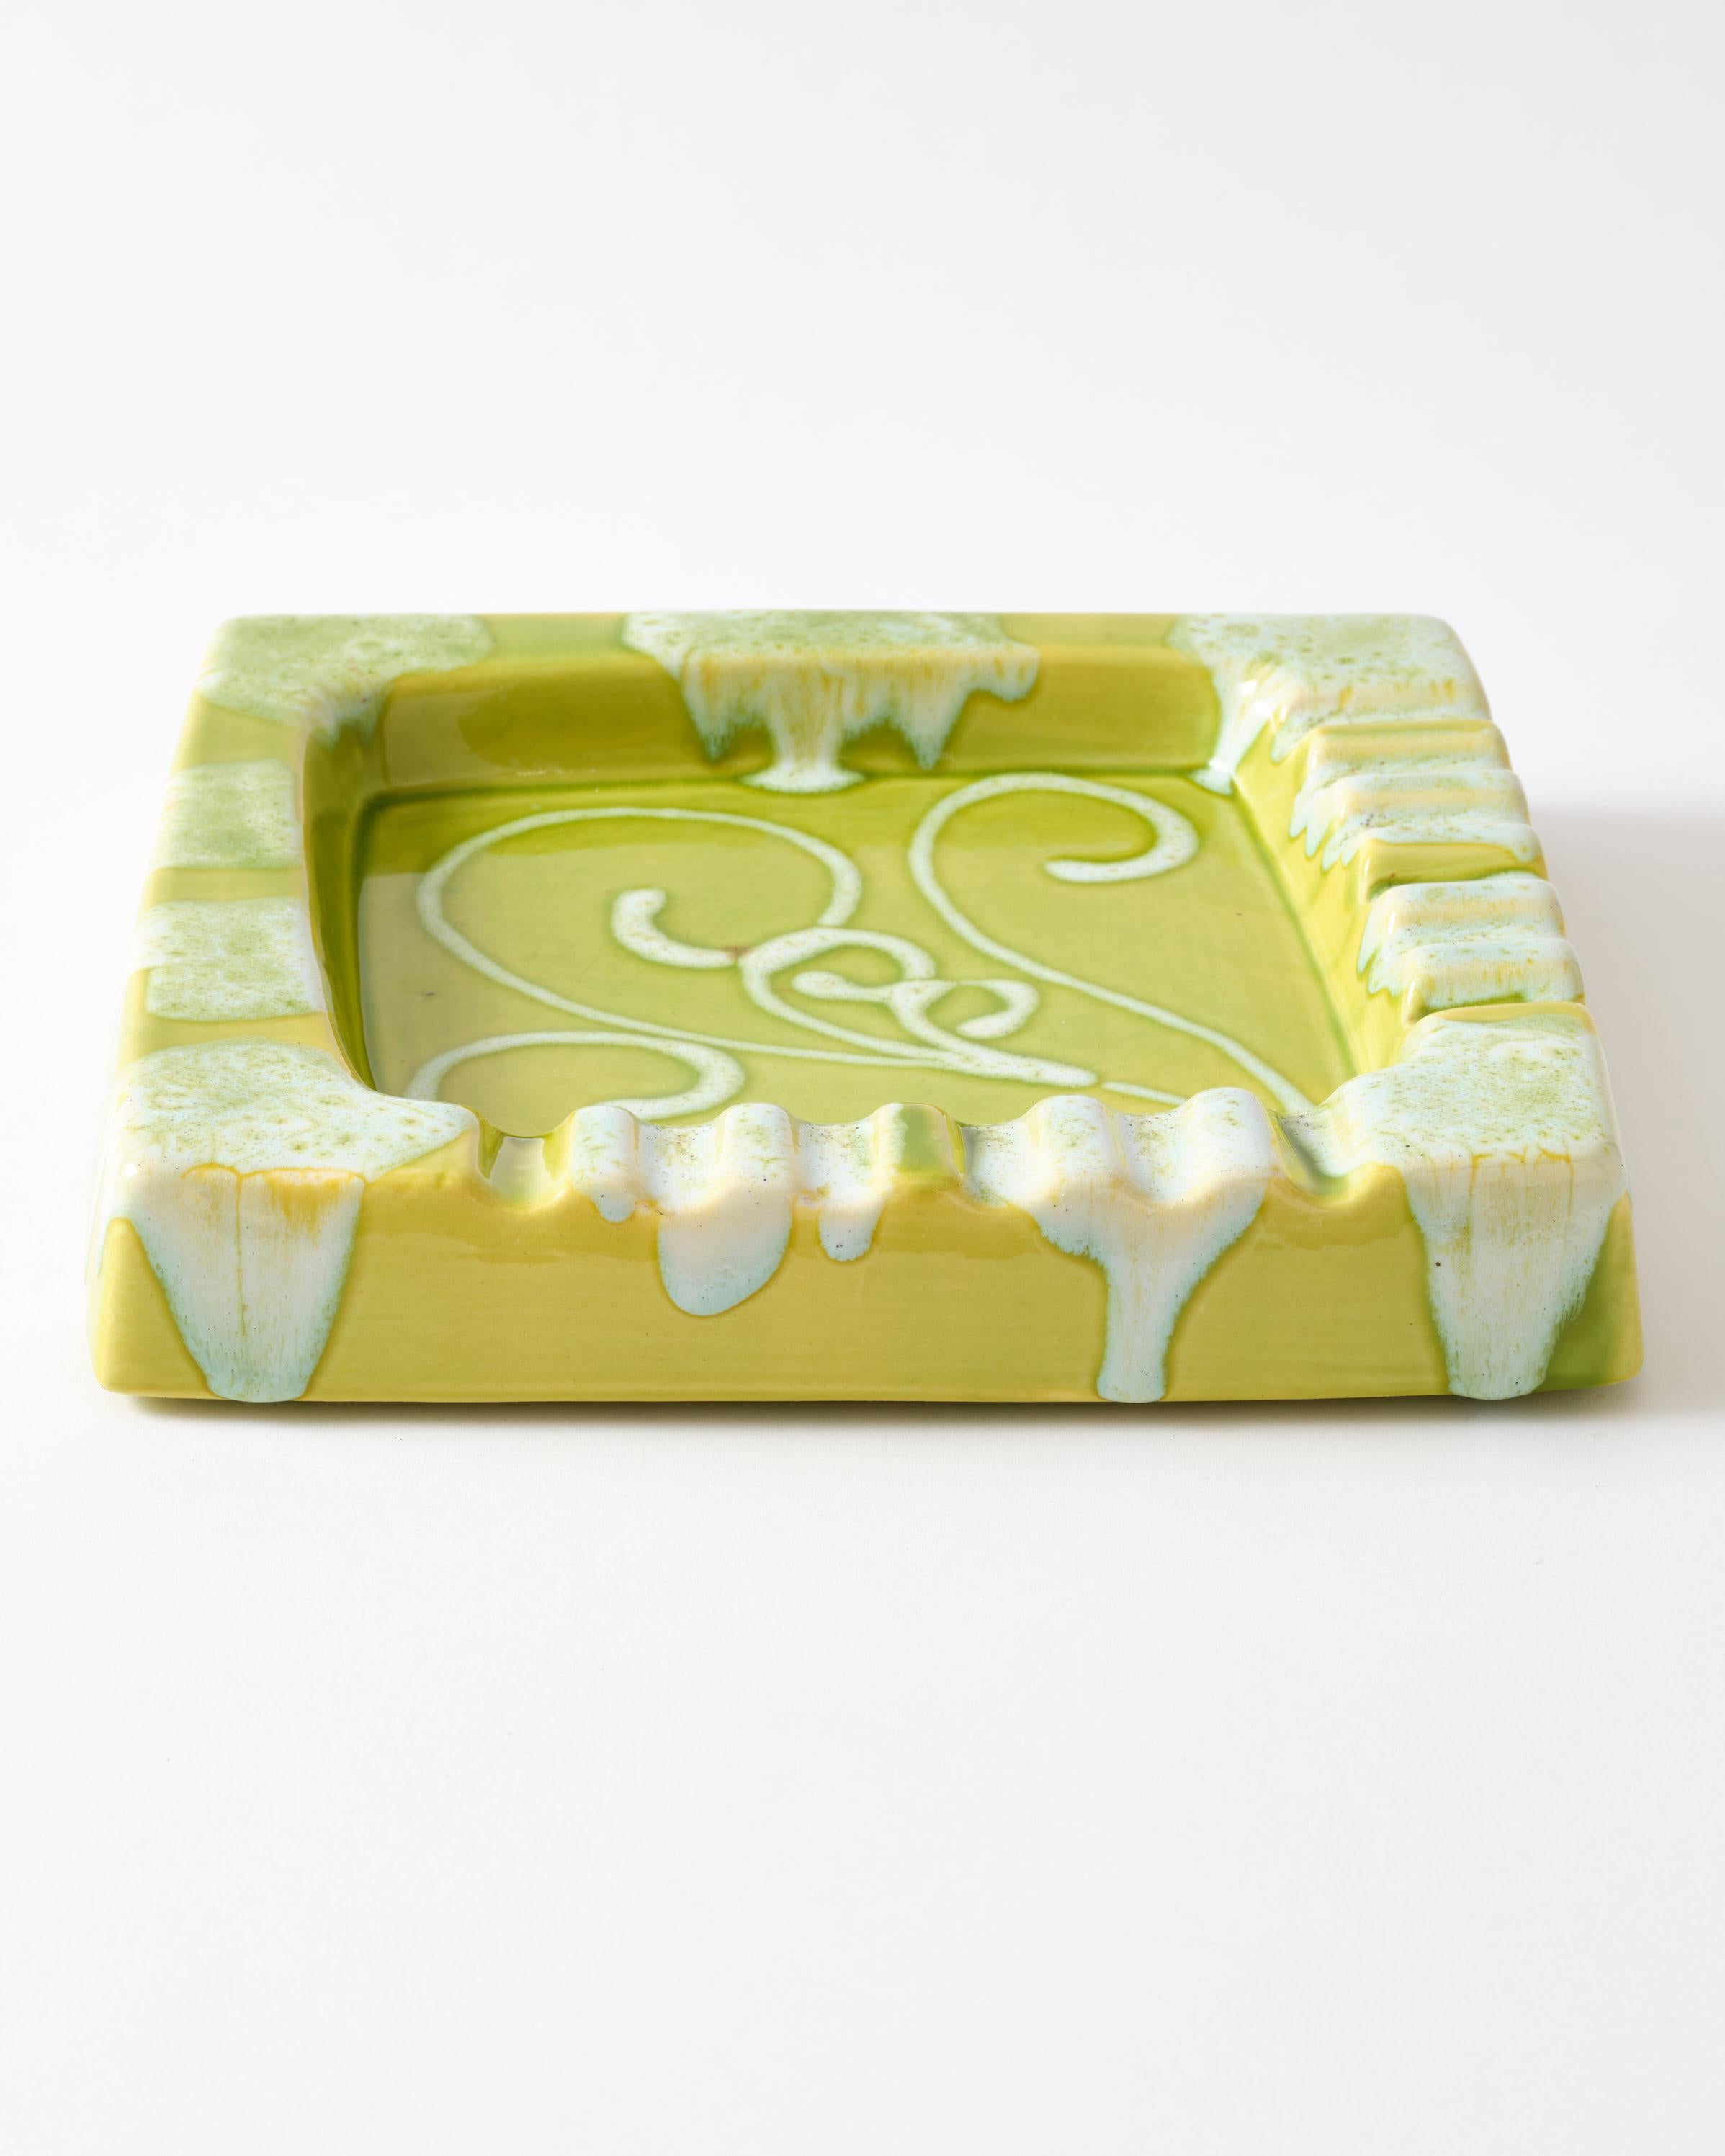 Ceramic Ashtray, Lime Green With White Details, Italy, C 1950, Vintage Ashtray For Sale 4